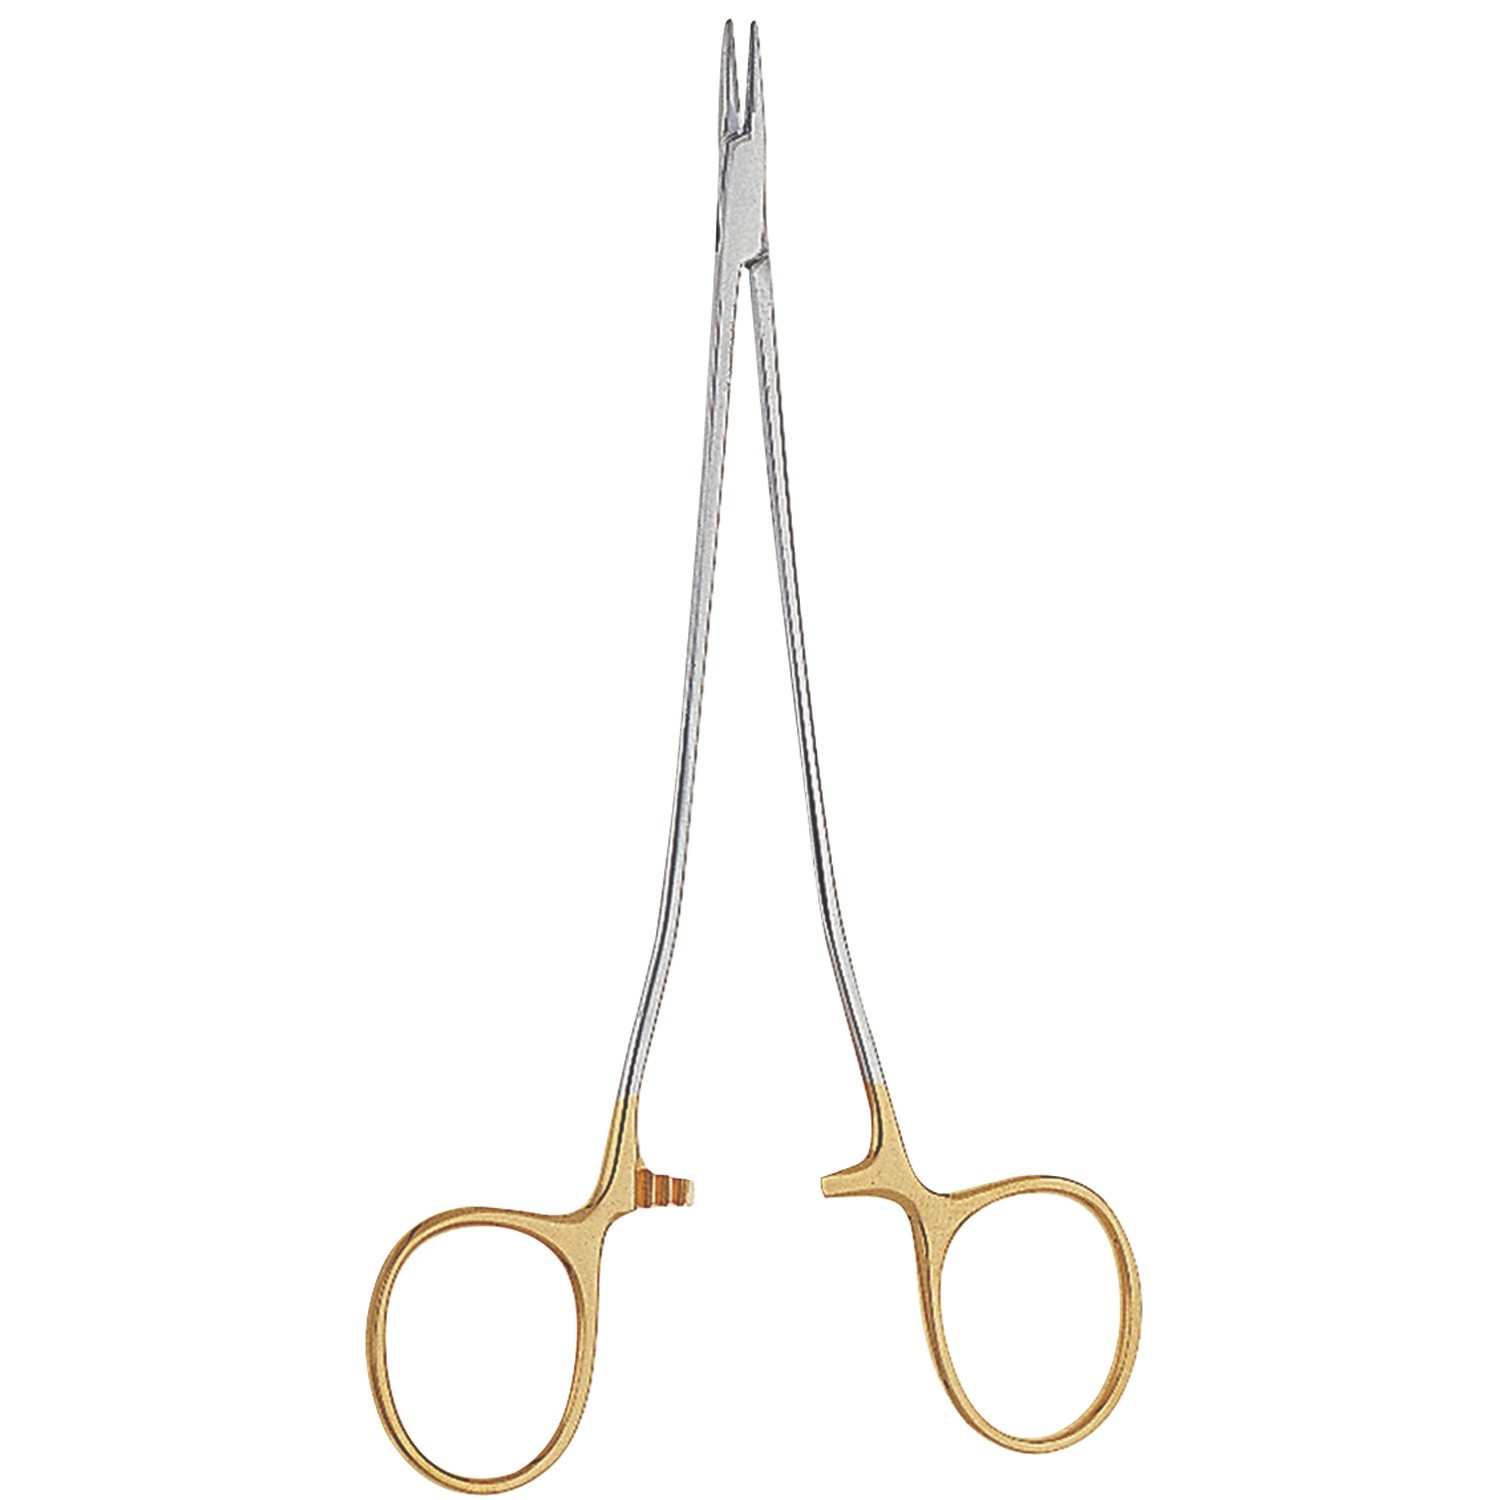 Cooley Microvascular Needle Holder, Tungsten Carbide, Very Delicate, Straight Jaws, Indented Shanks, Serrated, 6 3/4" (17.1 Cm)